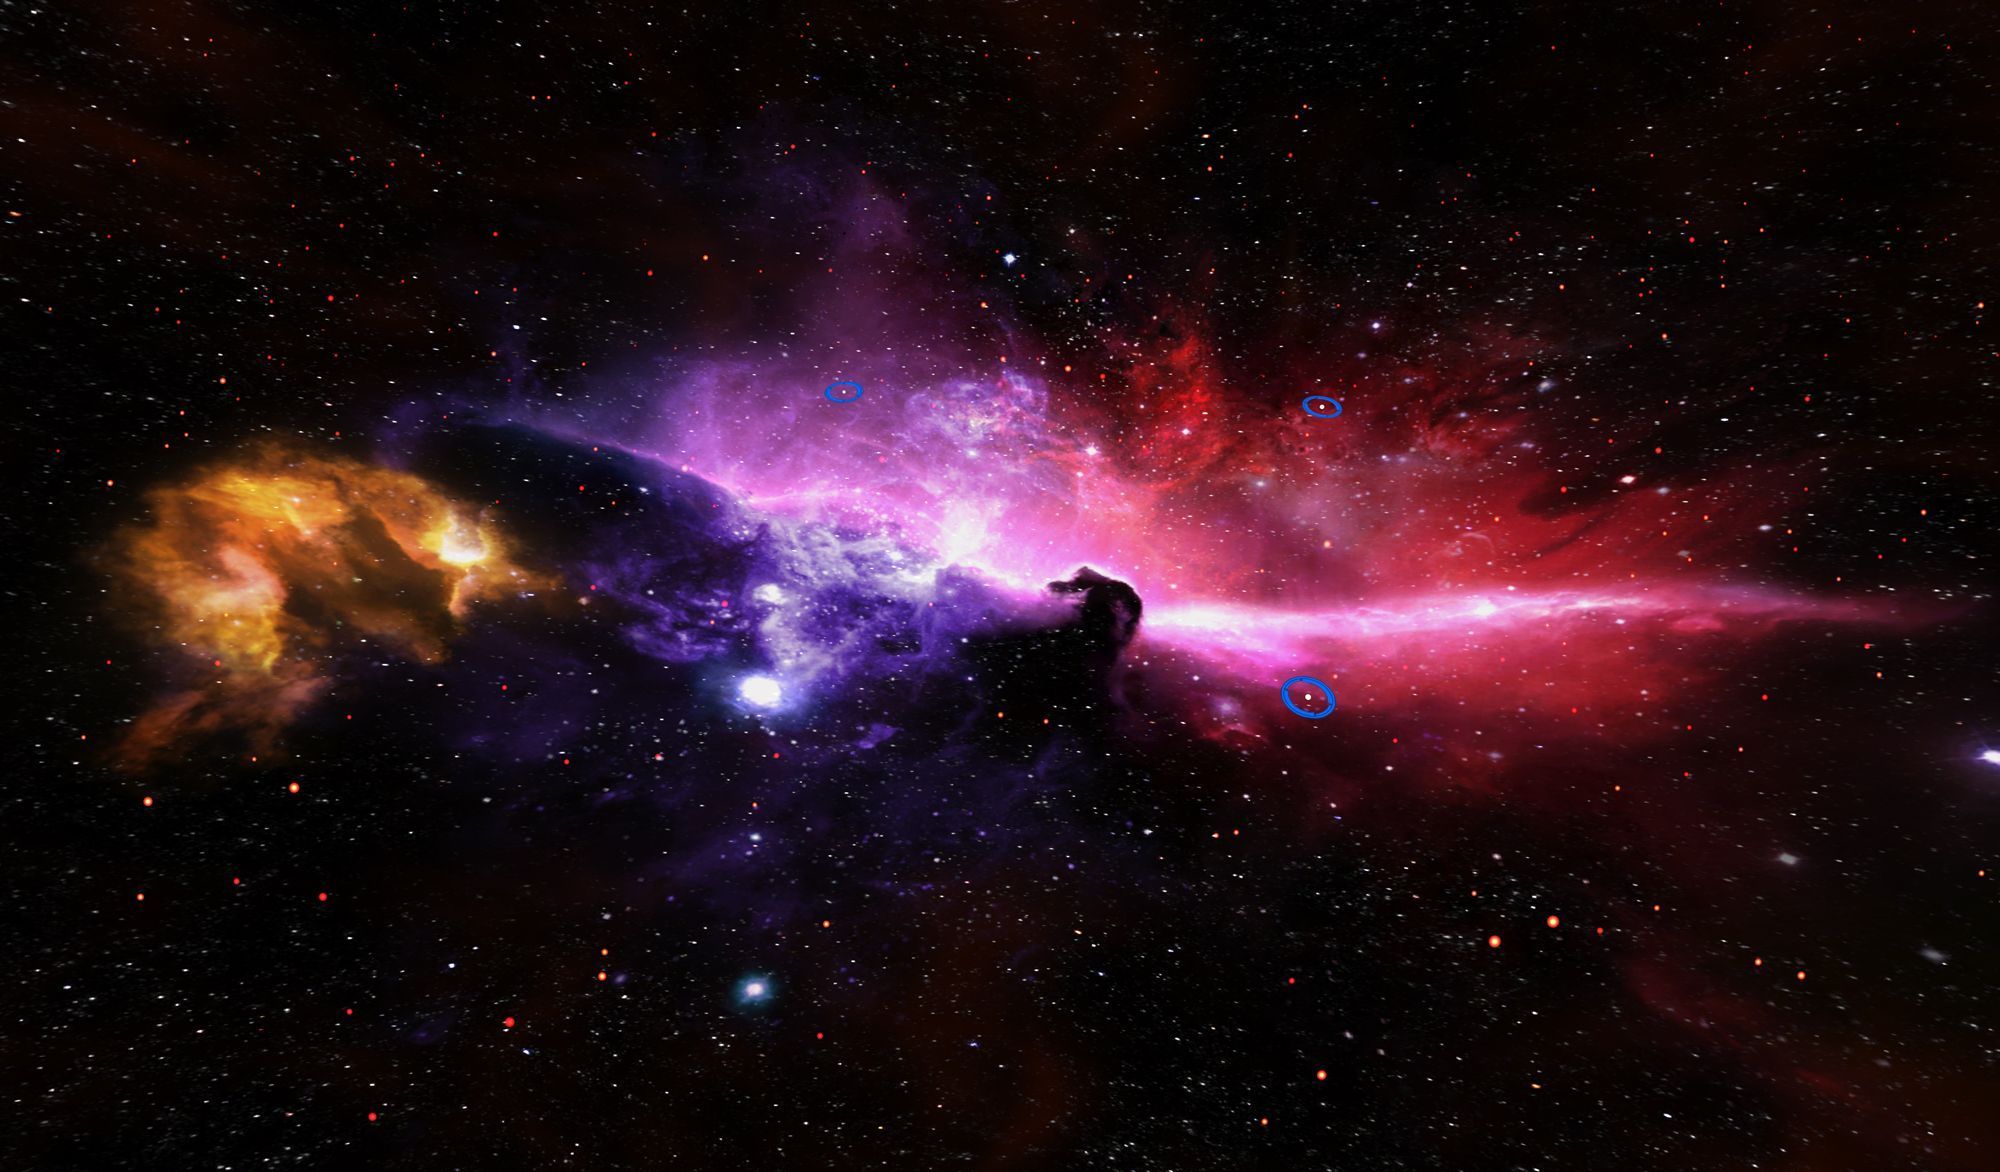 Horsehead Nebula Wallpaper - Pics about space